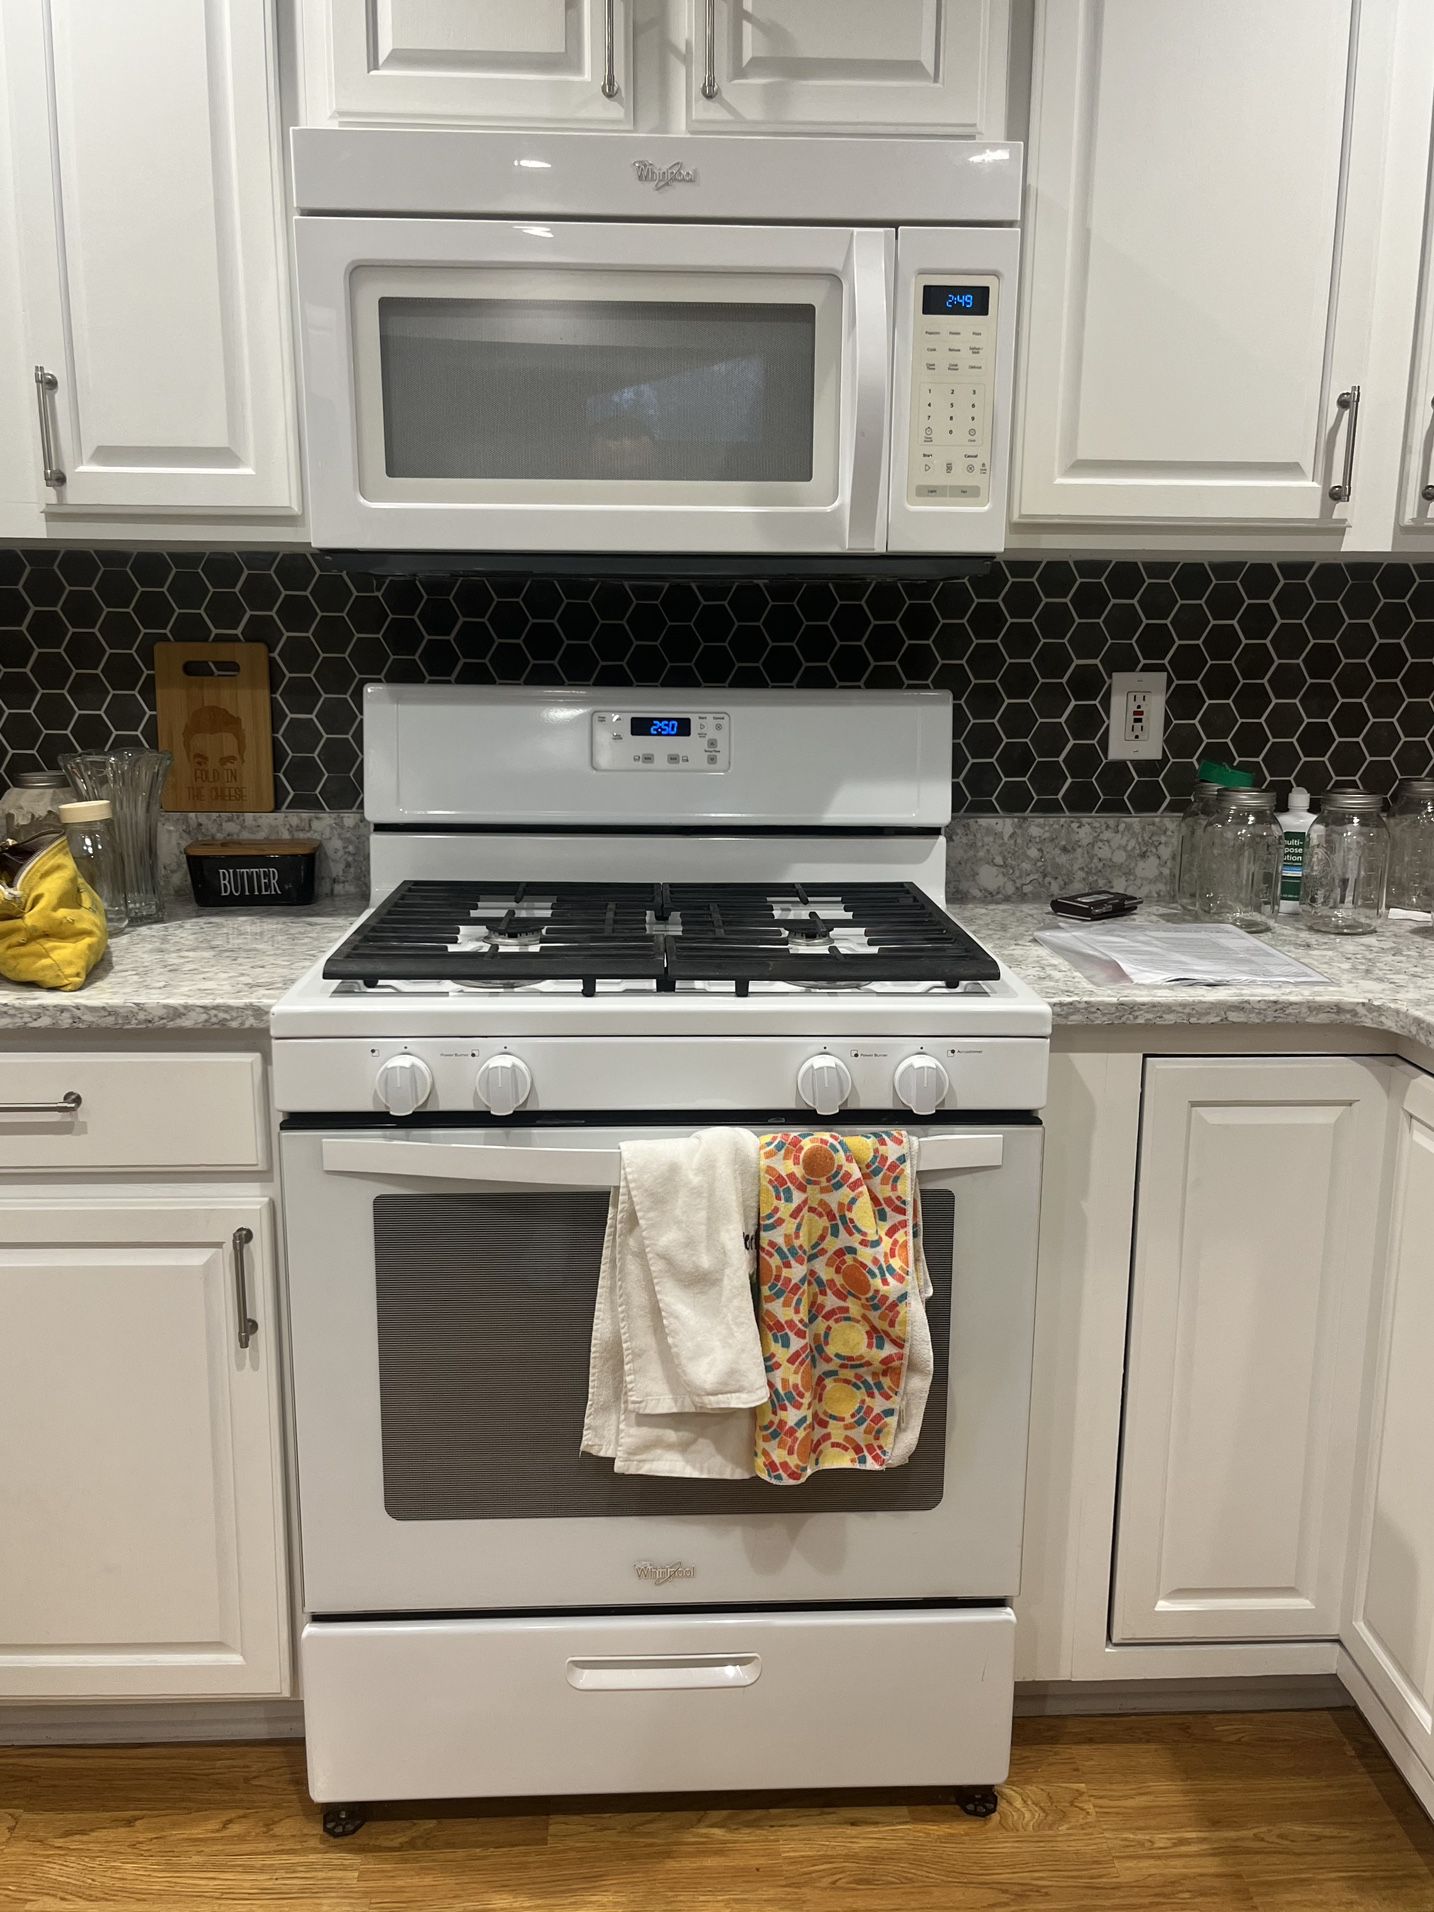 Whirlpool Oven and Microwave 